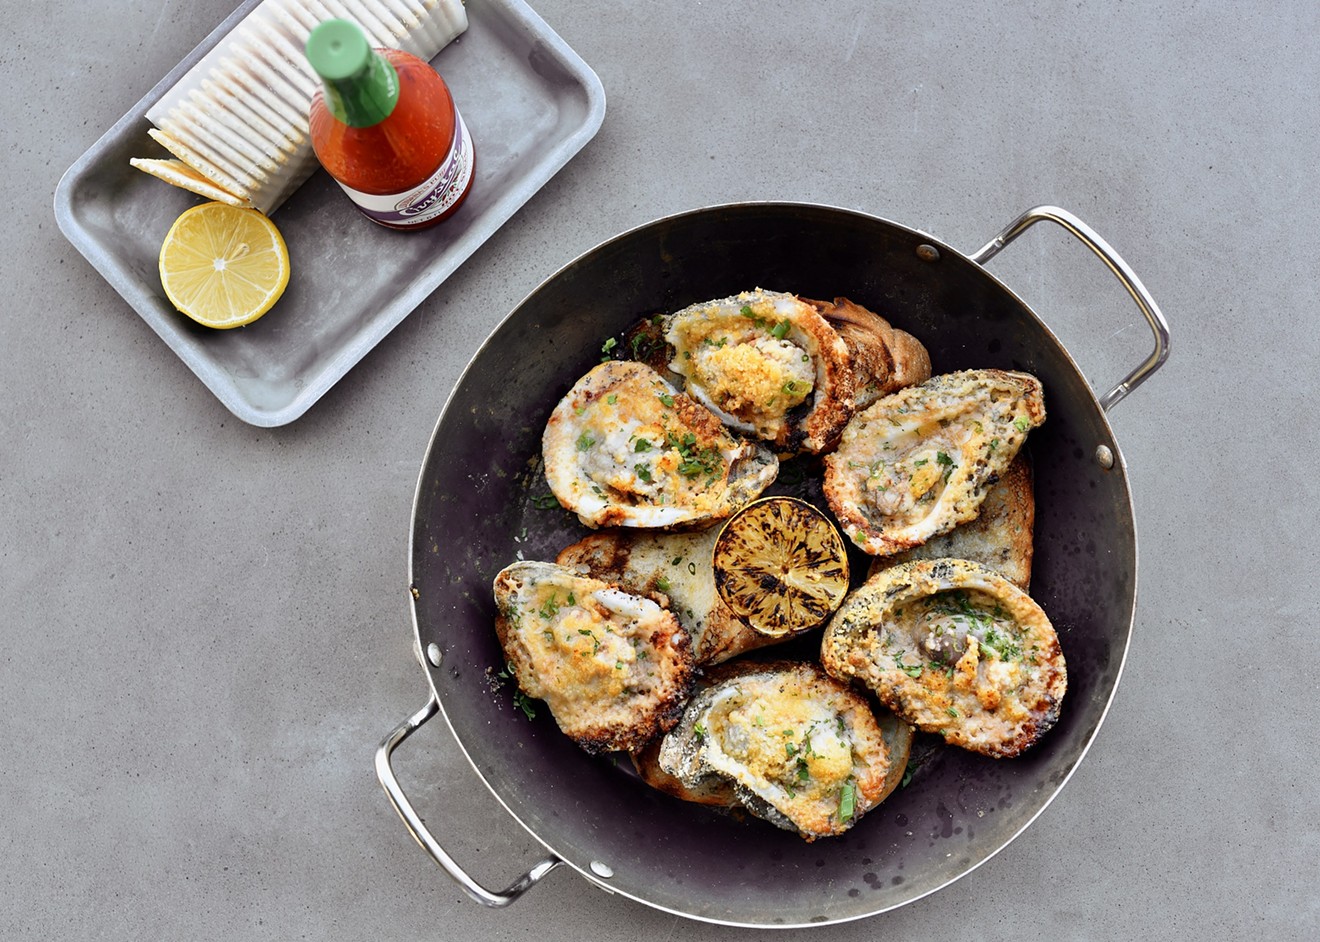 Put Pier 6 Seafood & Oyster House on your hit list this oyster season.